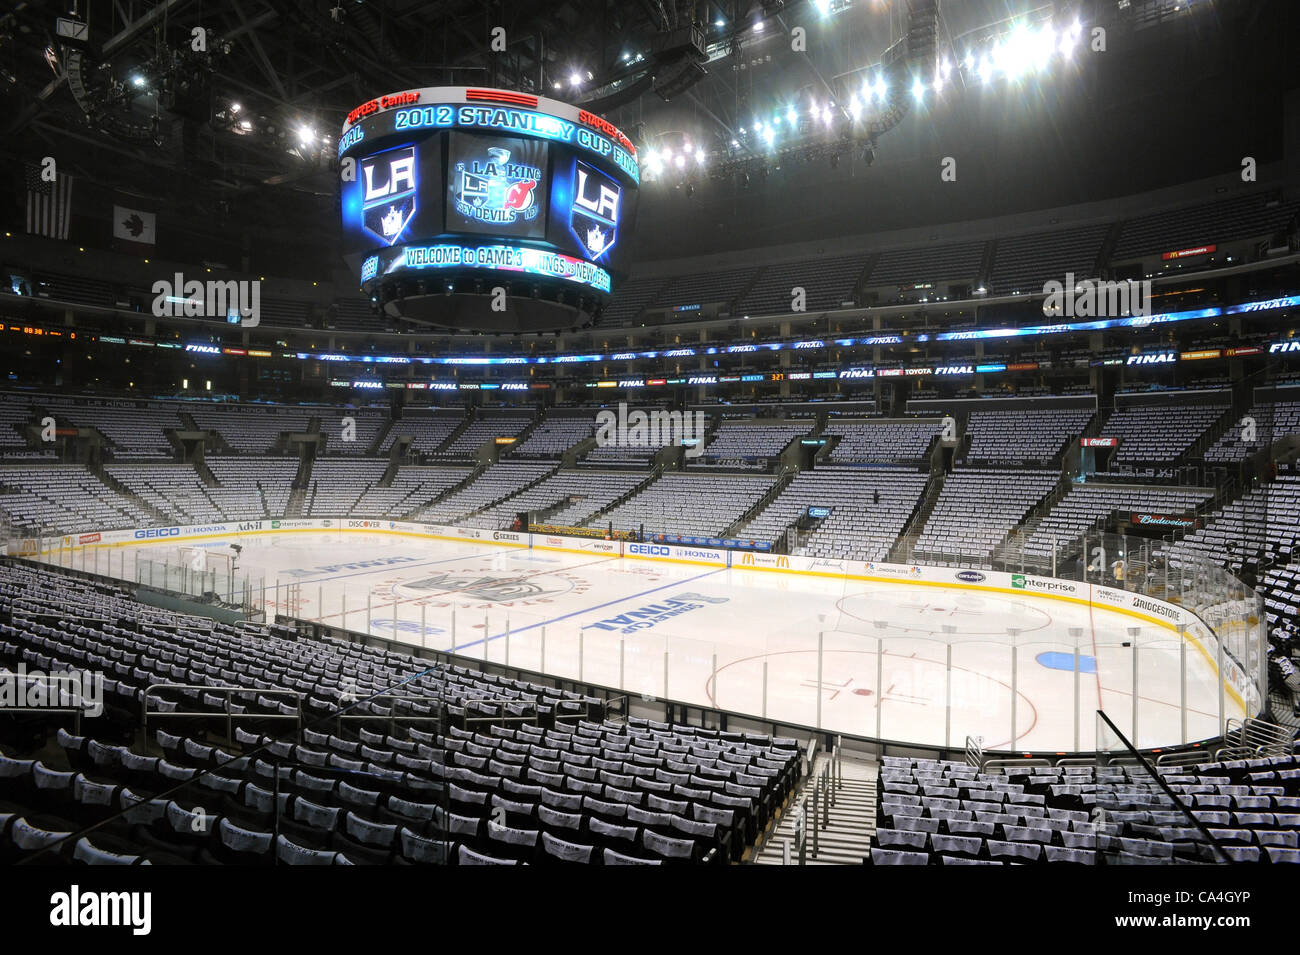 o4.06.2012. Staples Center, Los Angles, California.  A general view of the Staples Center and ice prior to game 3 of the Stanley Cup Final between the New Jersey Devils and the Los Angeles Kings at the Staples Center in Los Angeles, CA. Stock Photo